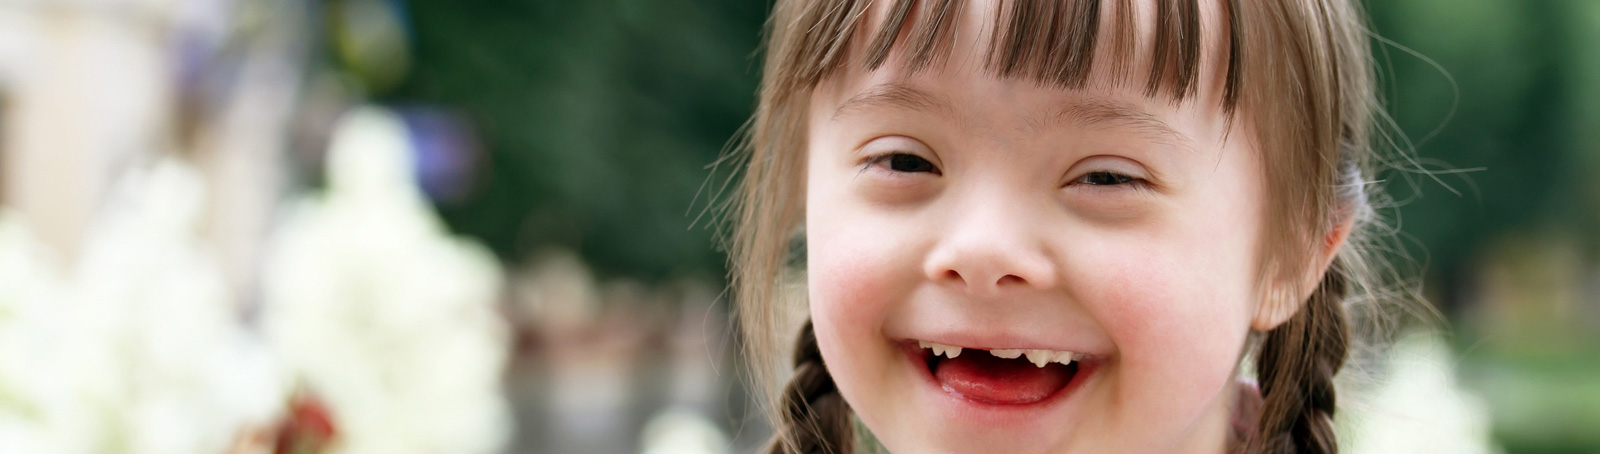 Smiling Disabled Child